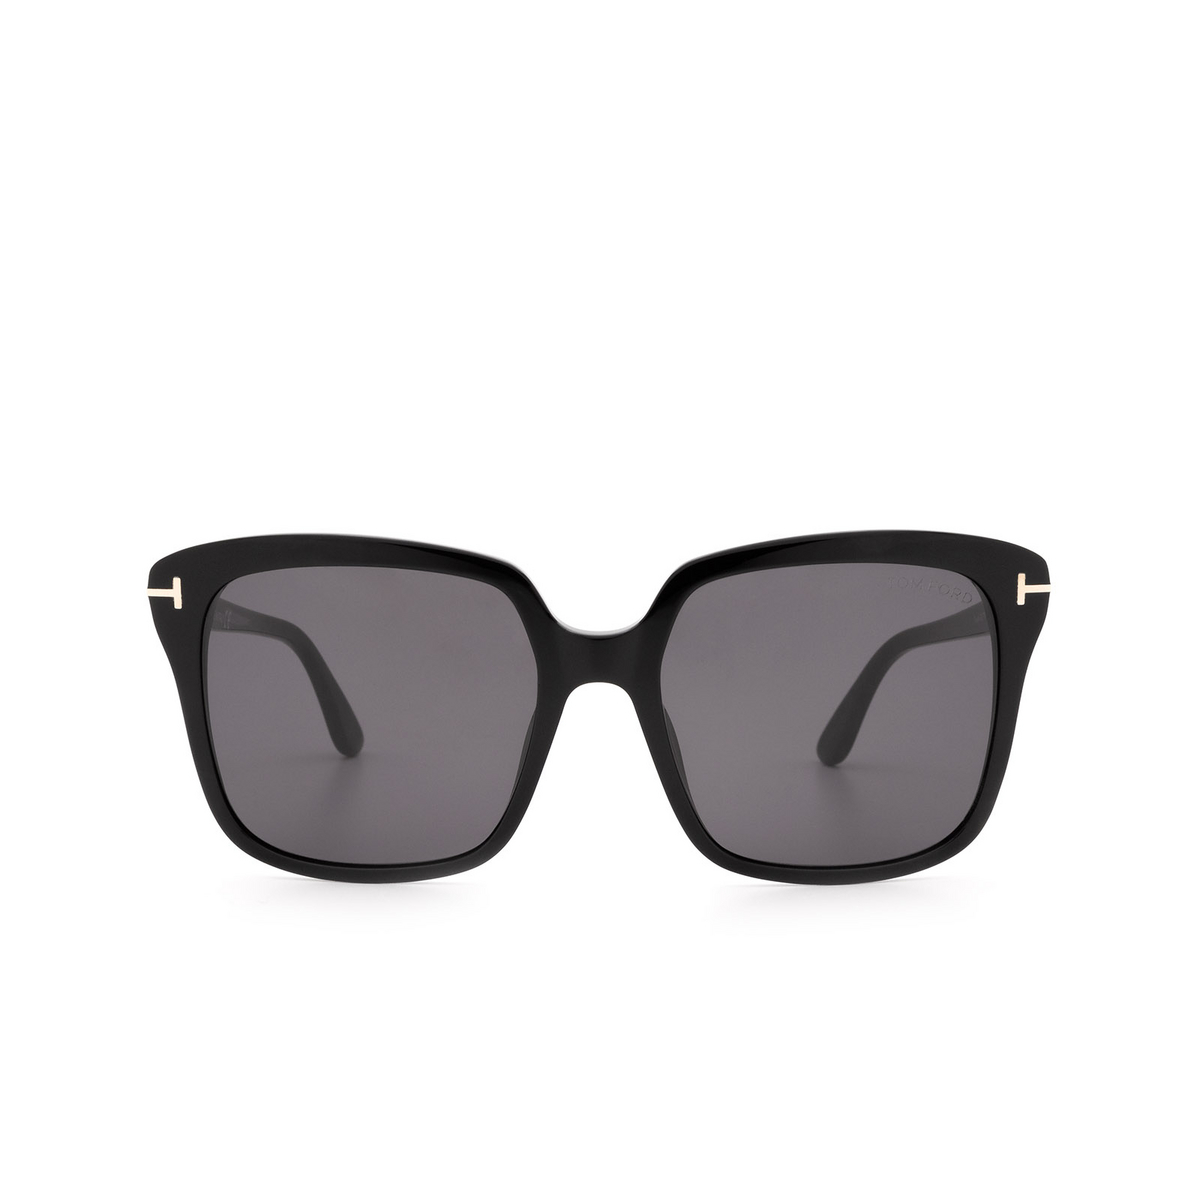 Tom Ford FAYE-02 Sunglasses 01A Shiny Black - front view